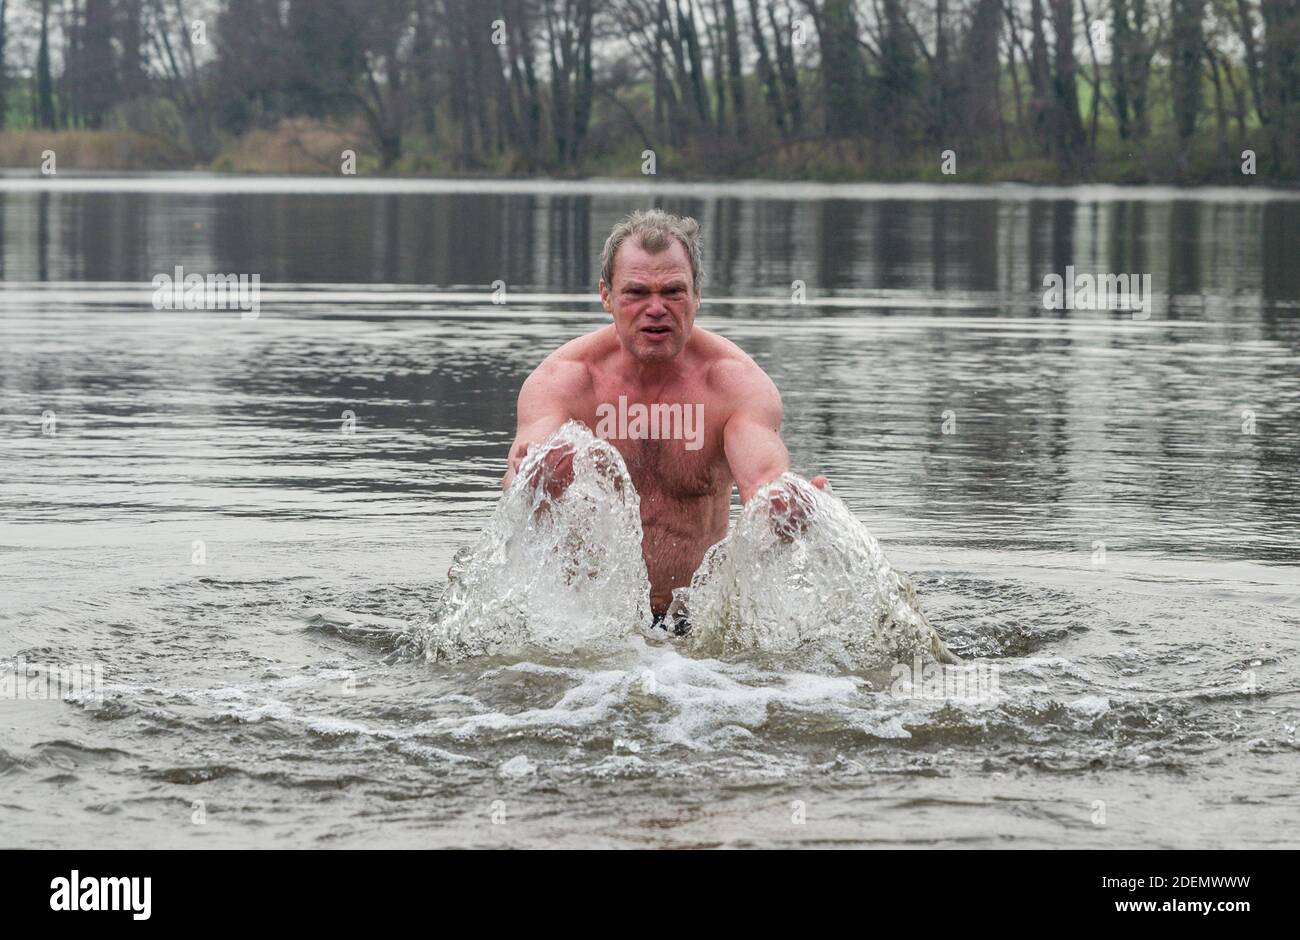 01 December 2020, Brandenburg, Alt Zeschdorf: The 66-year-old Klaus from Frankfurt (Oder) comes from the water of the Hohenjesarscher Lake, after a bath in water that is only four degrees Celsius cold. Klaus comes about twice a week from Frankfurt (Oder), 15 kilometres away, to pursue his passion for ice bathing. This keeps him young and healthy, he says. Photo: Patrick Pleul/dpa-Zentralbild/ZB Stock Photo